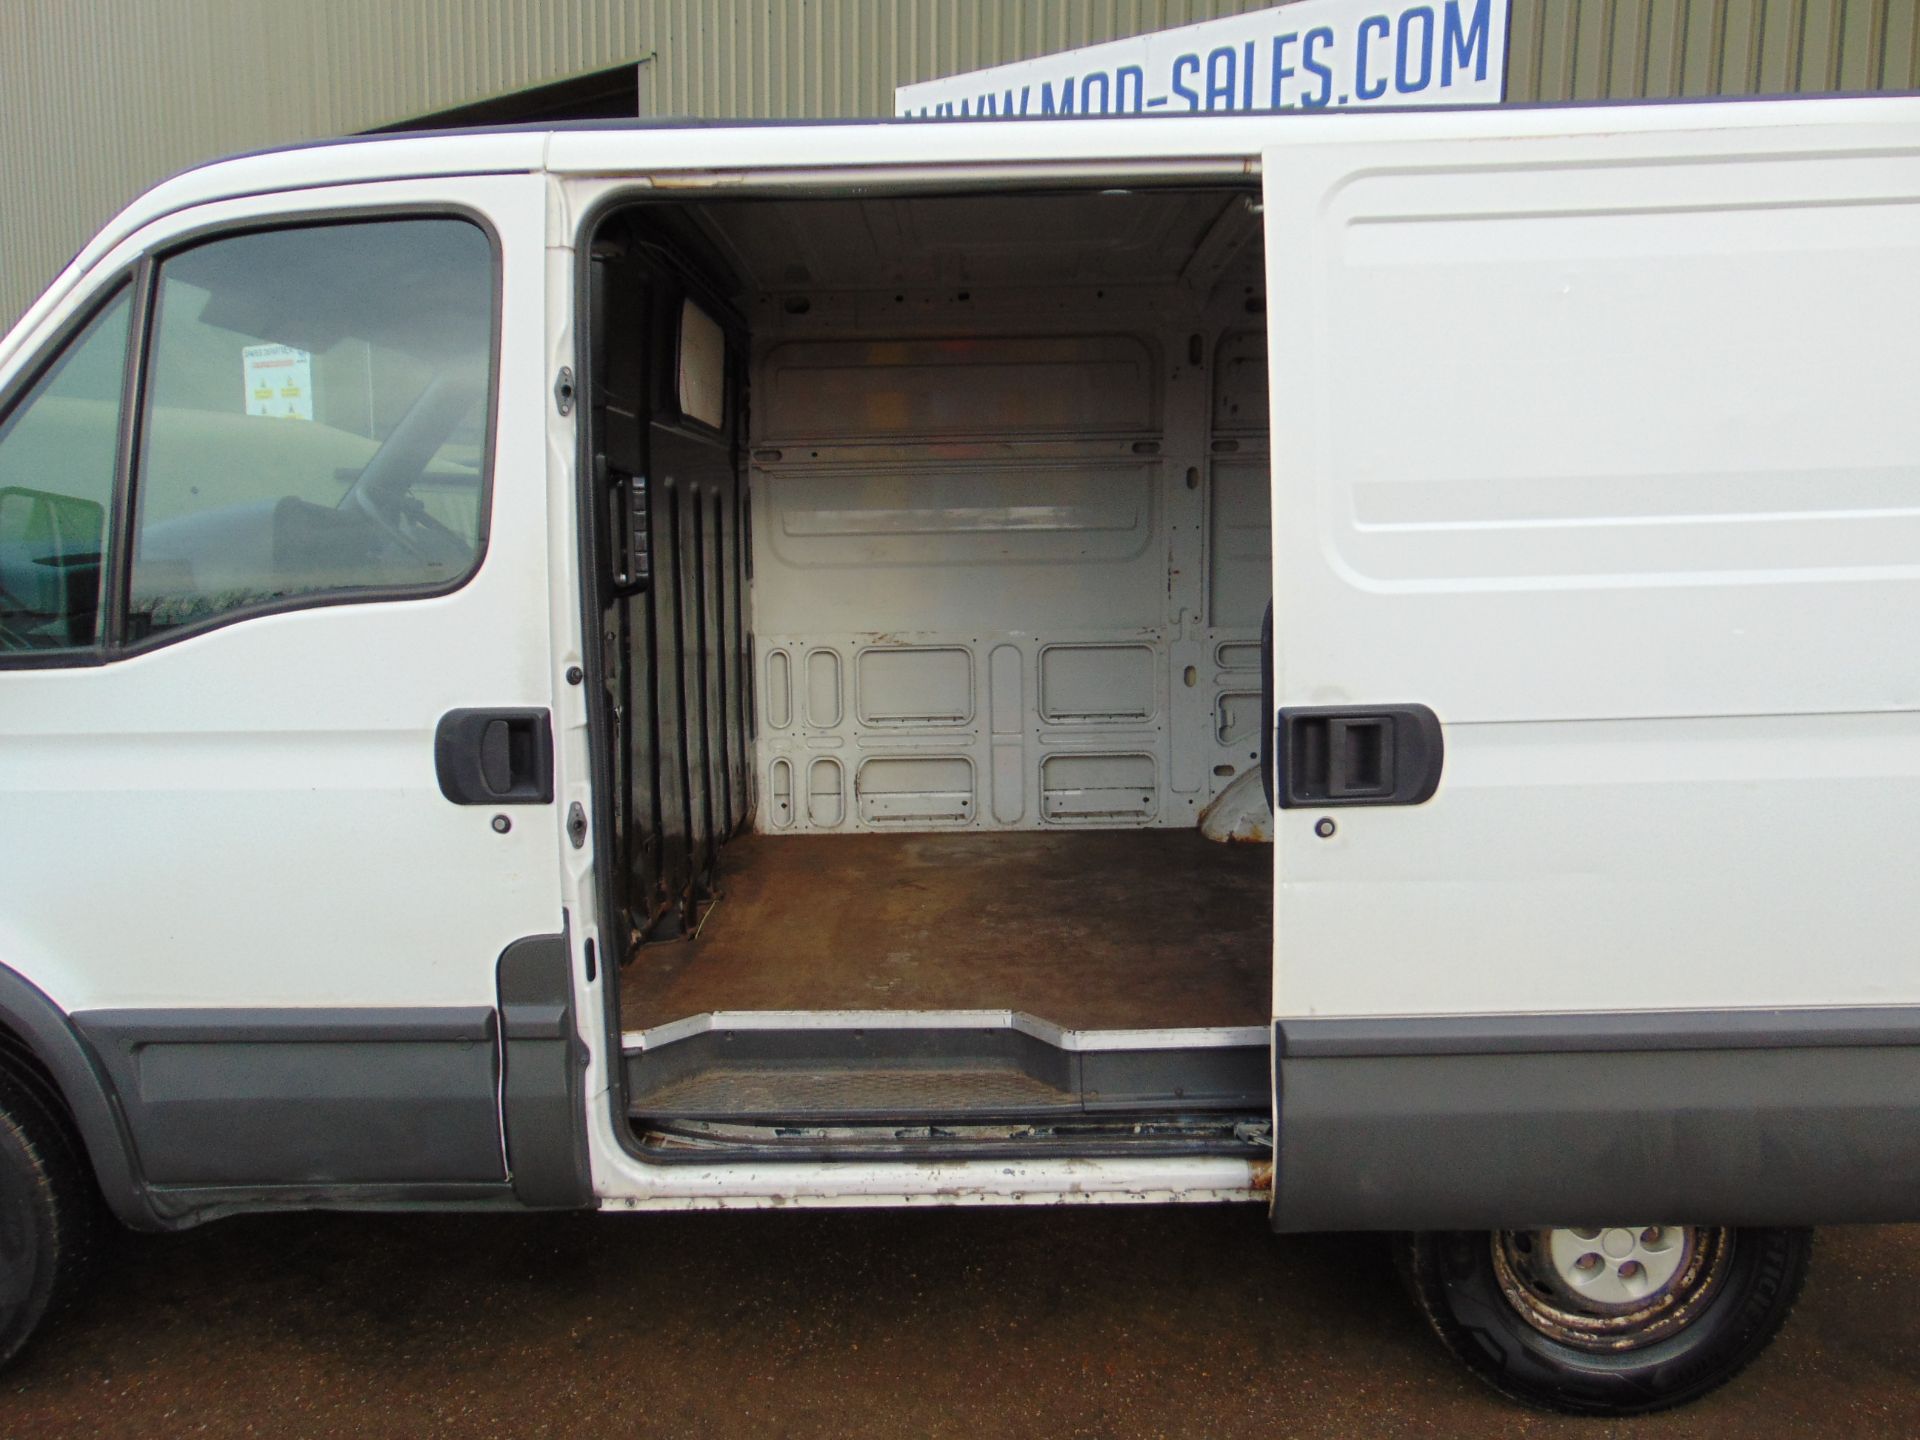 2004 Iveco Daily 35C11 2.3L Panel Van ONLY 85,917 MILES! - Image 9 of 19